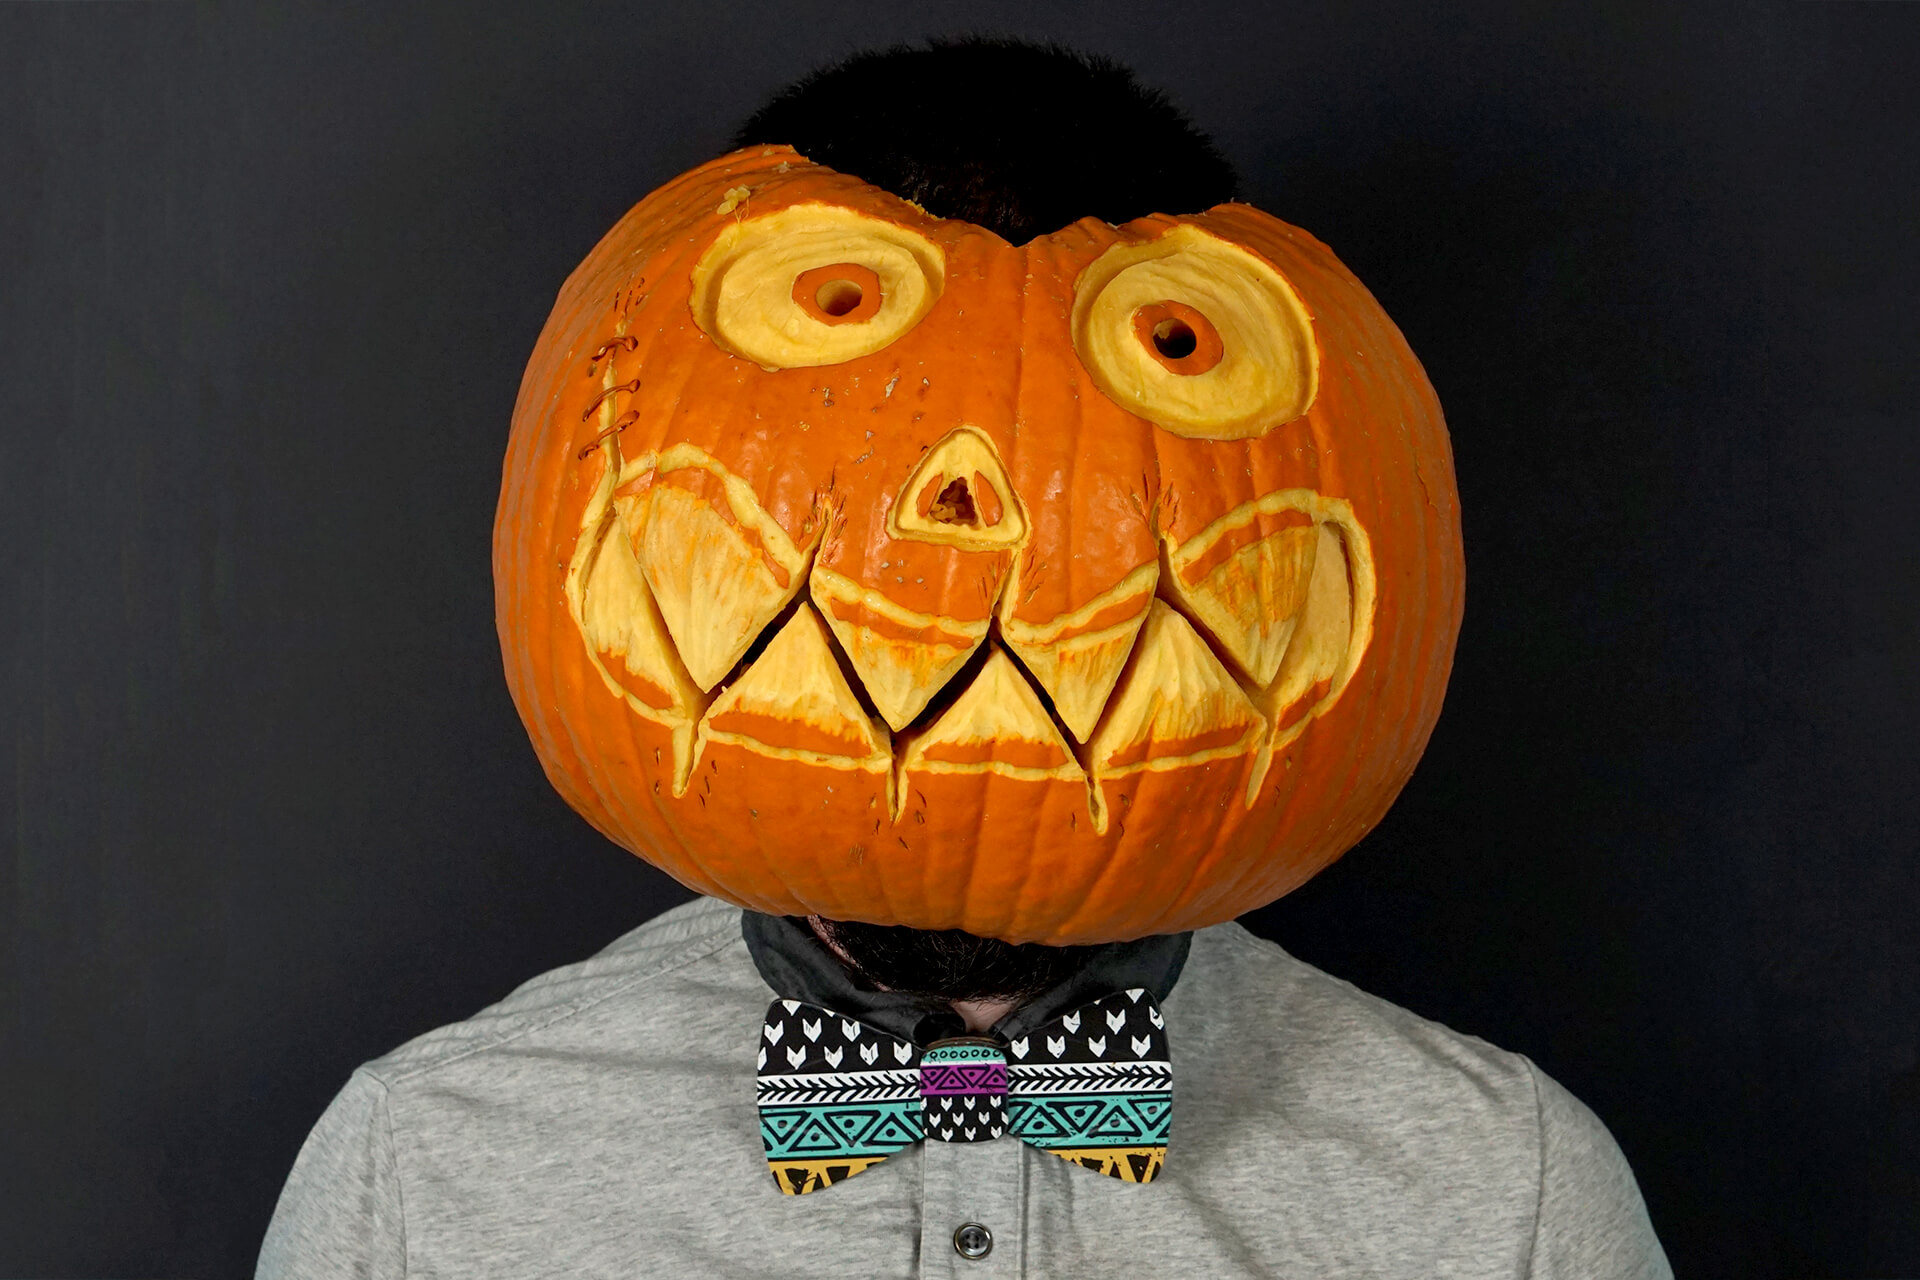 A lifestyle shot of the cardboard doodle bow tie on someone wearing a pumpkin head